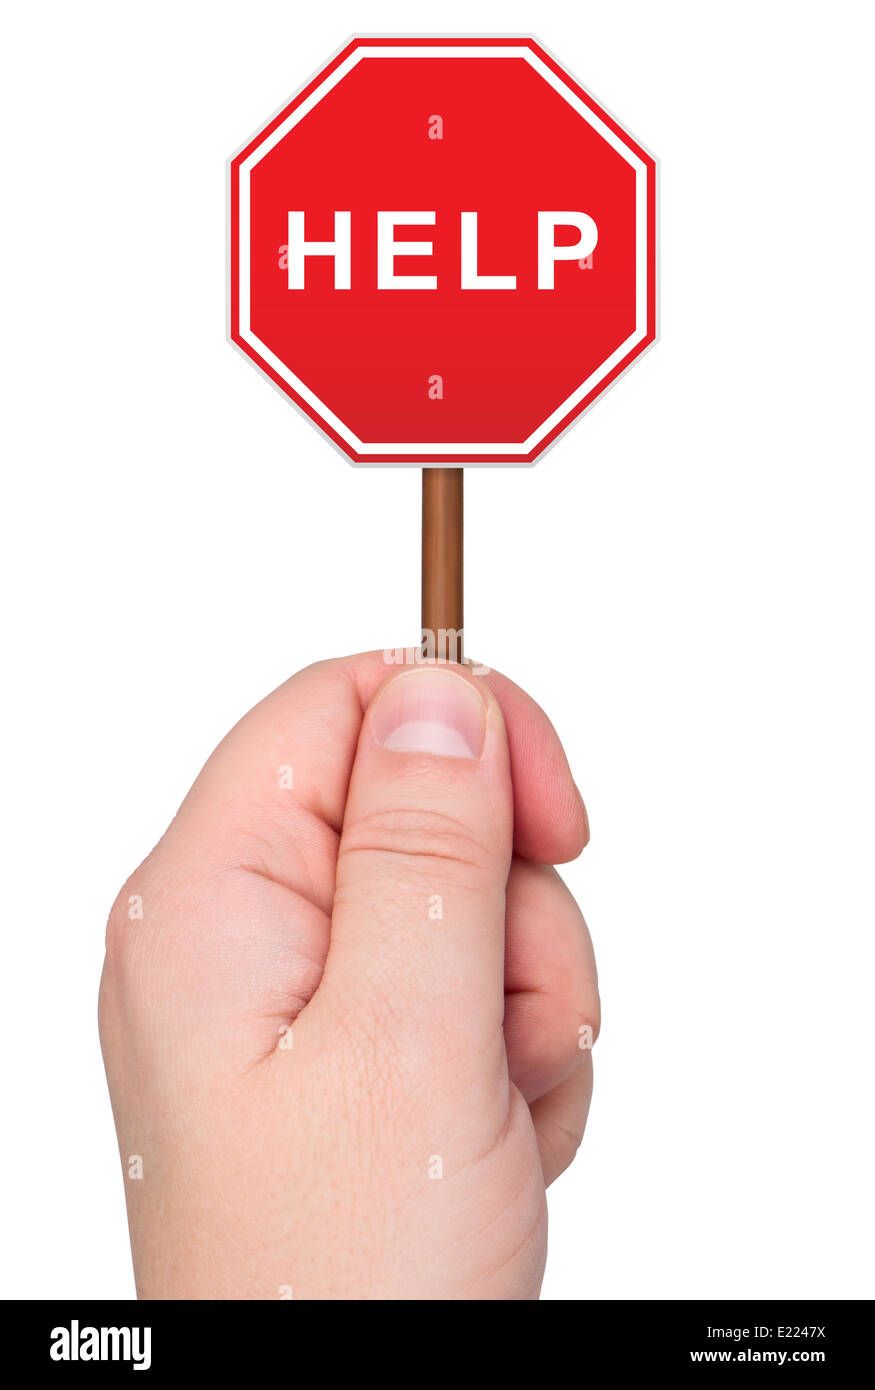 Warning sign with word HELP holds in hand. Stock Photo